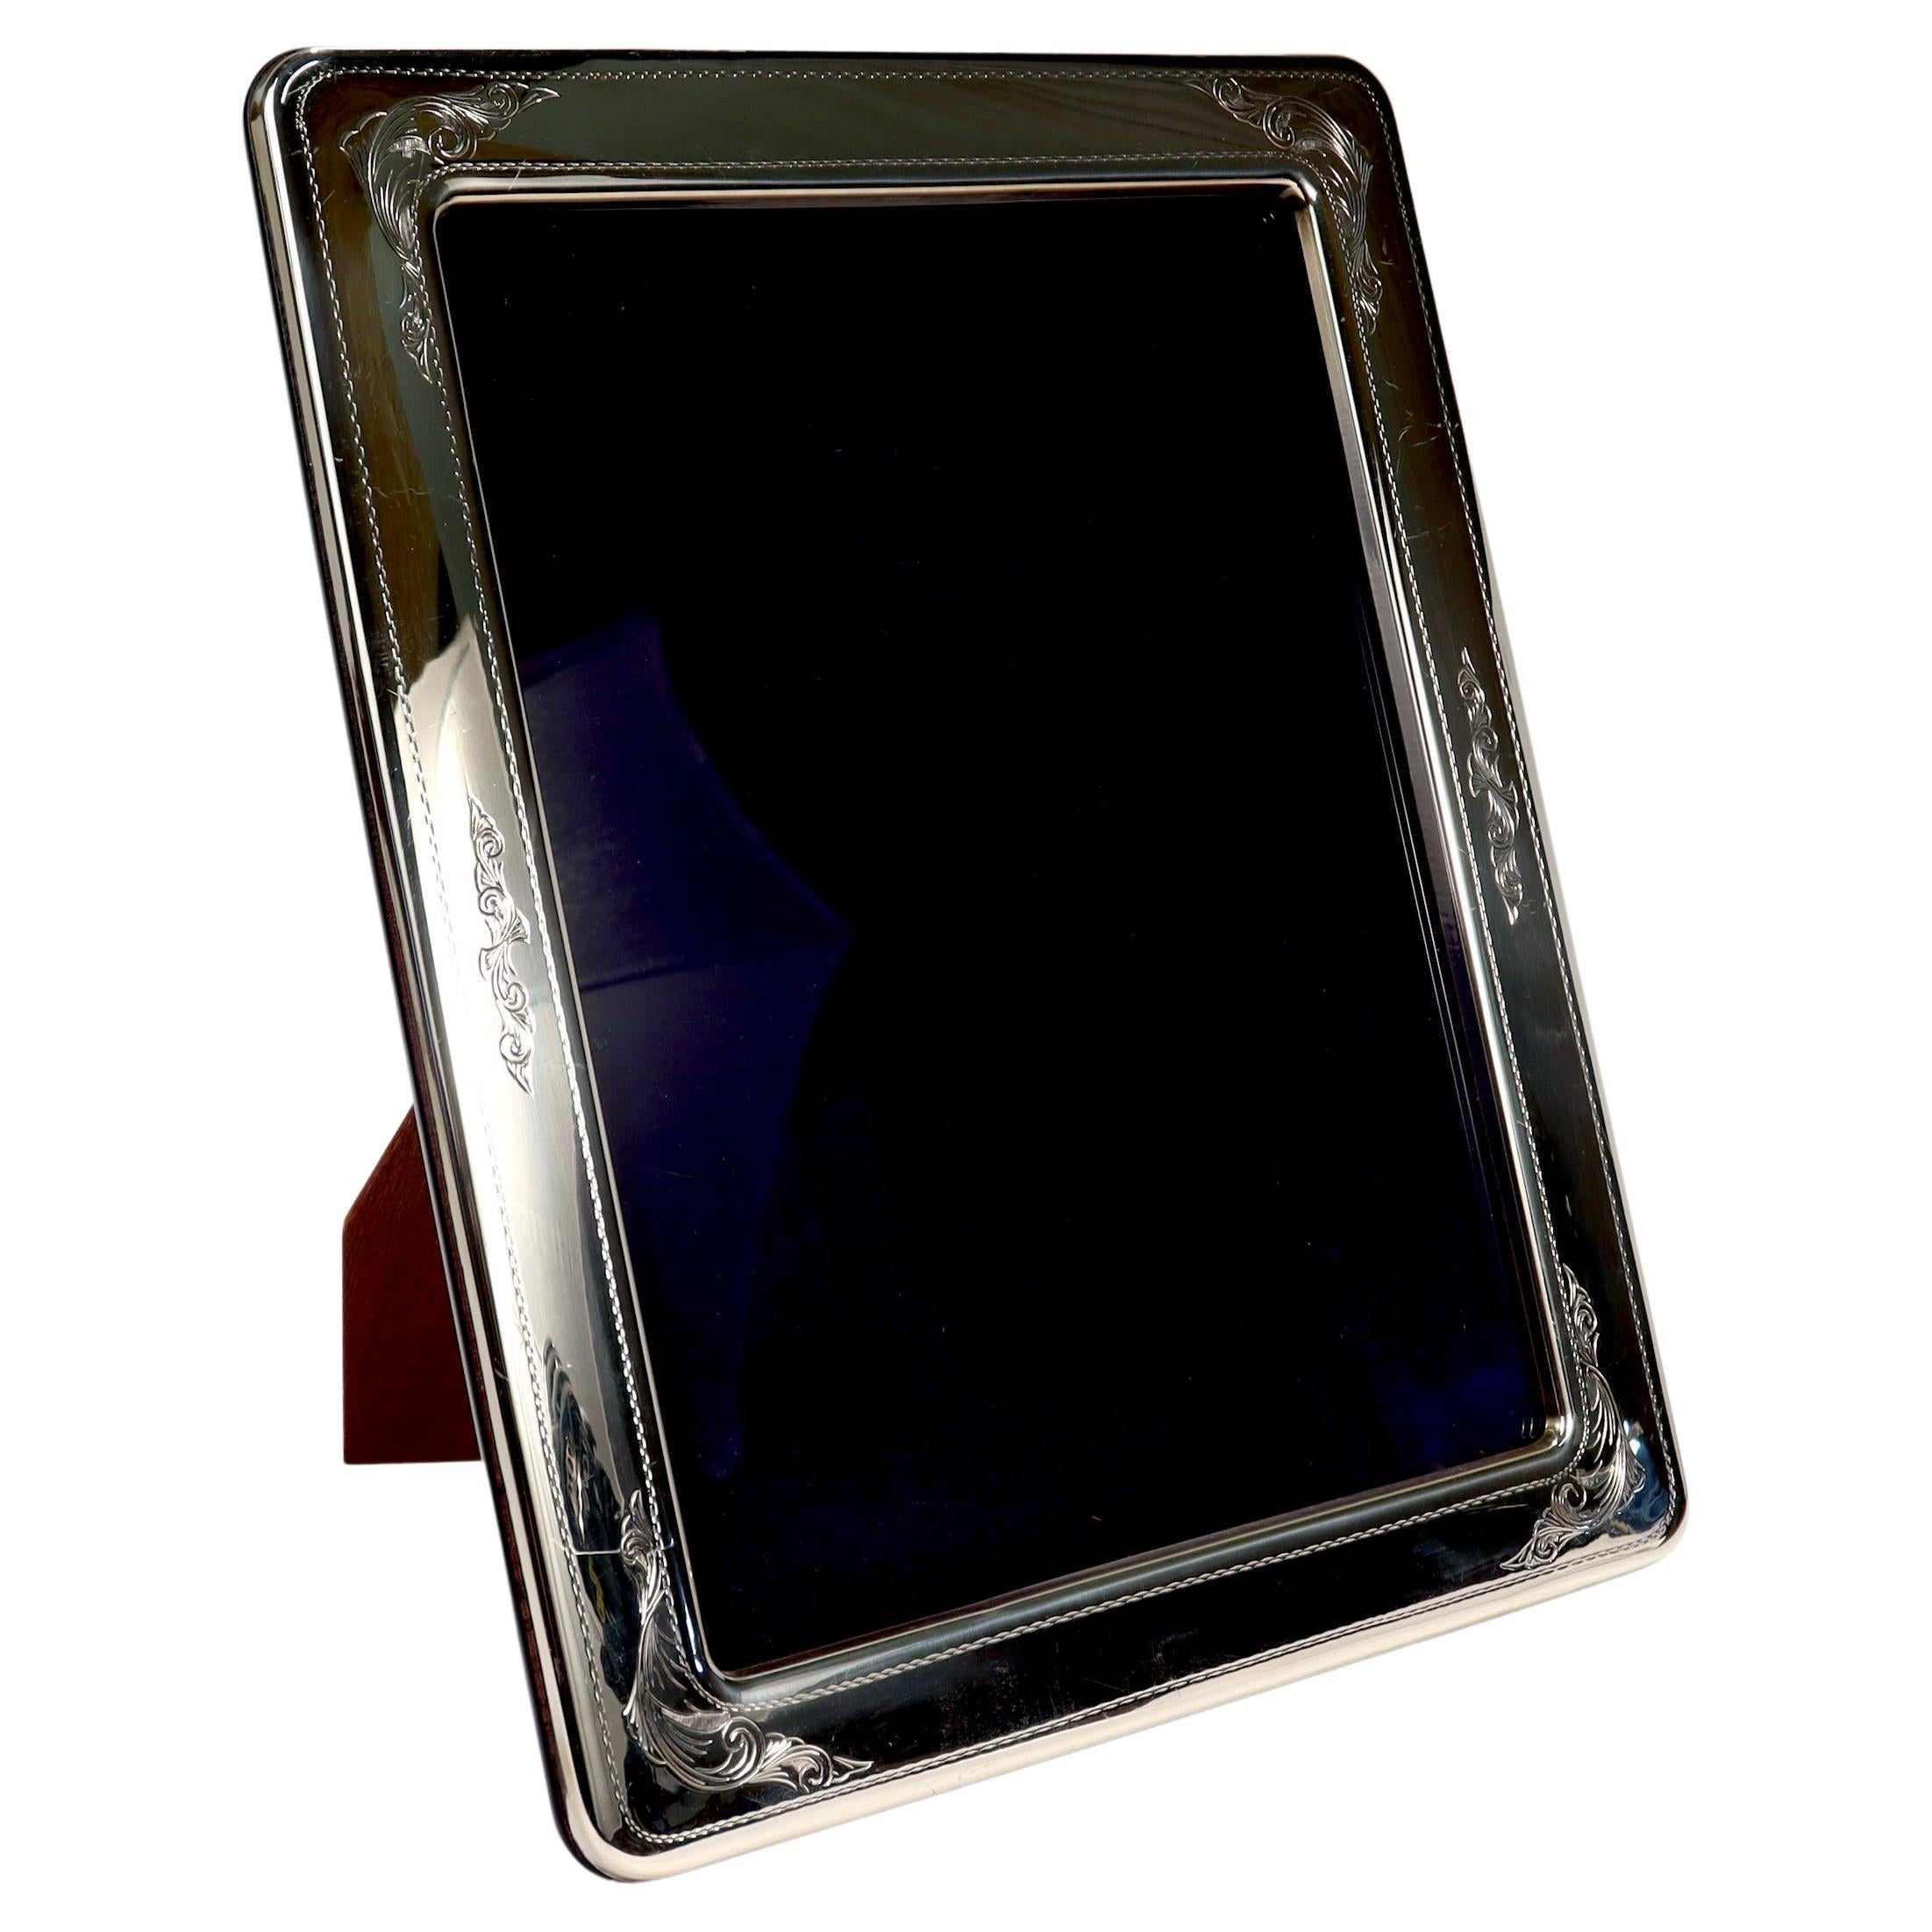 A fine sterling silver frame.

By Reed & Barton.

With rounded corners & etched decoration to the sides. 

Simply a wonderful frame!

Date:
Early 21st Century

Overall Condition:
It is in overall good, as-pictured, used estate condition.

Condition